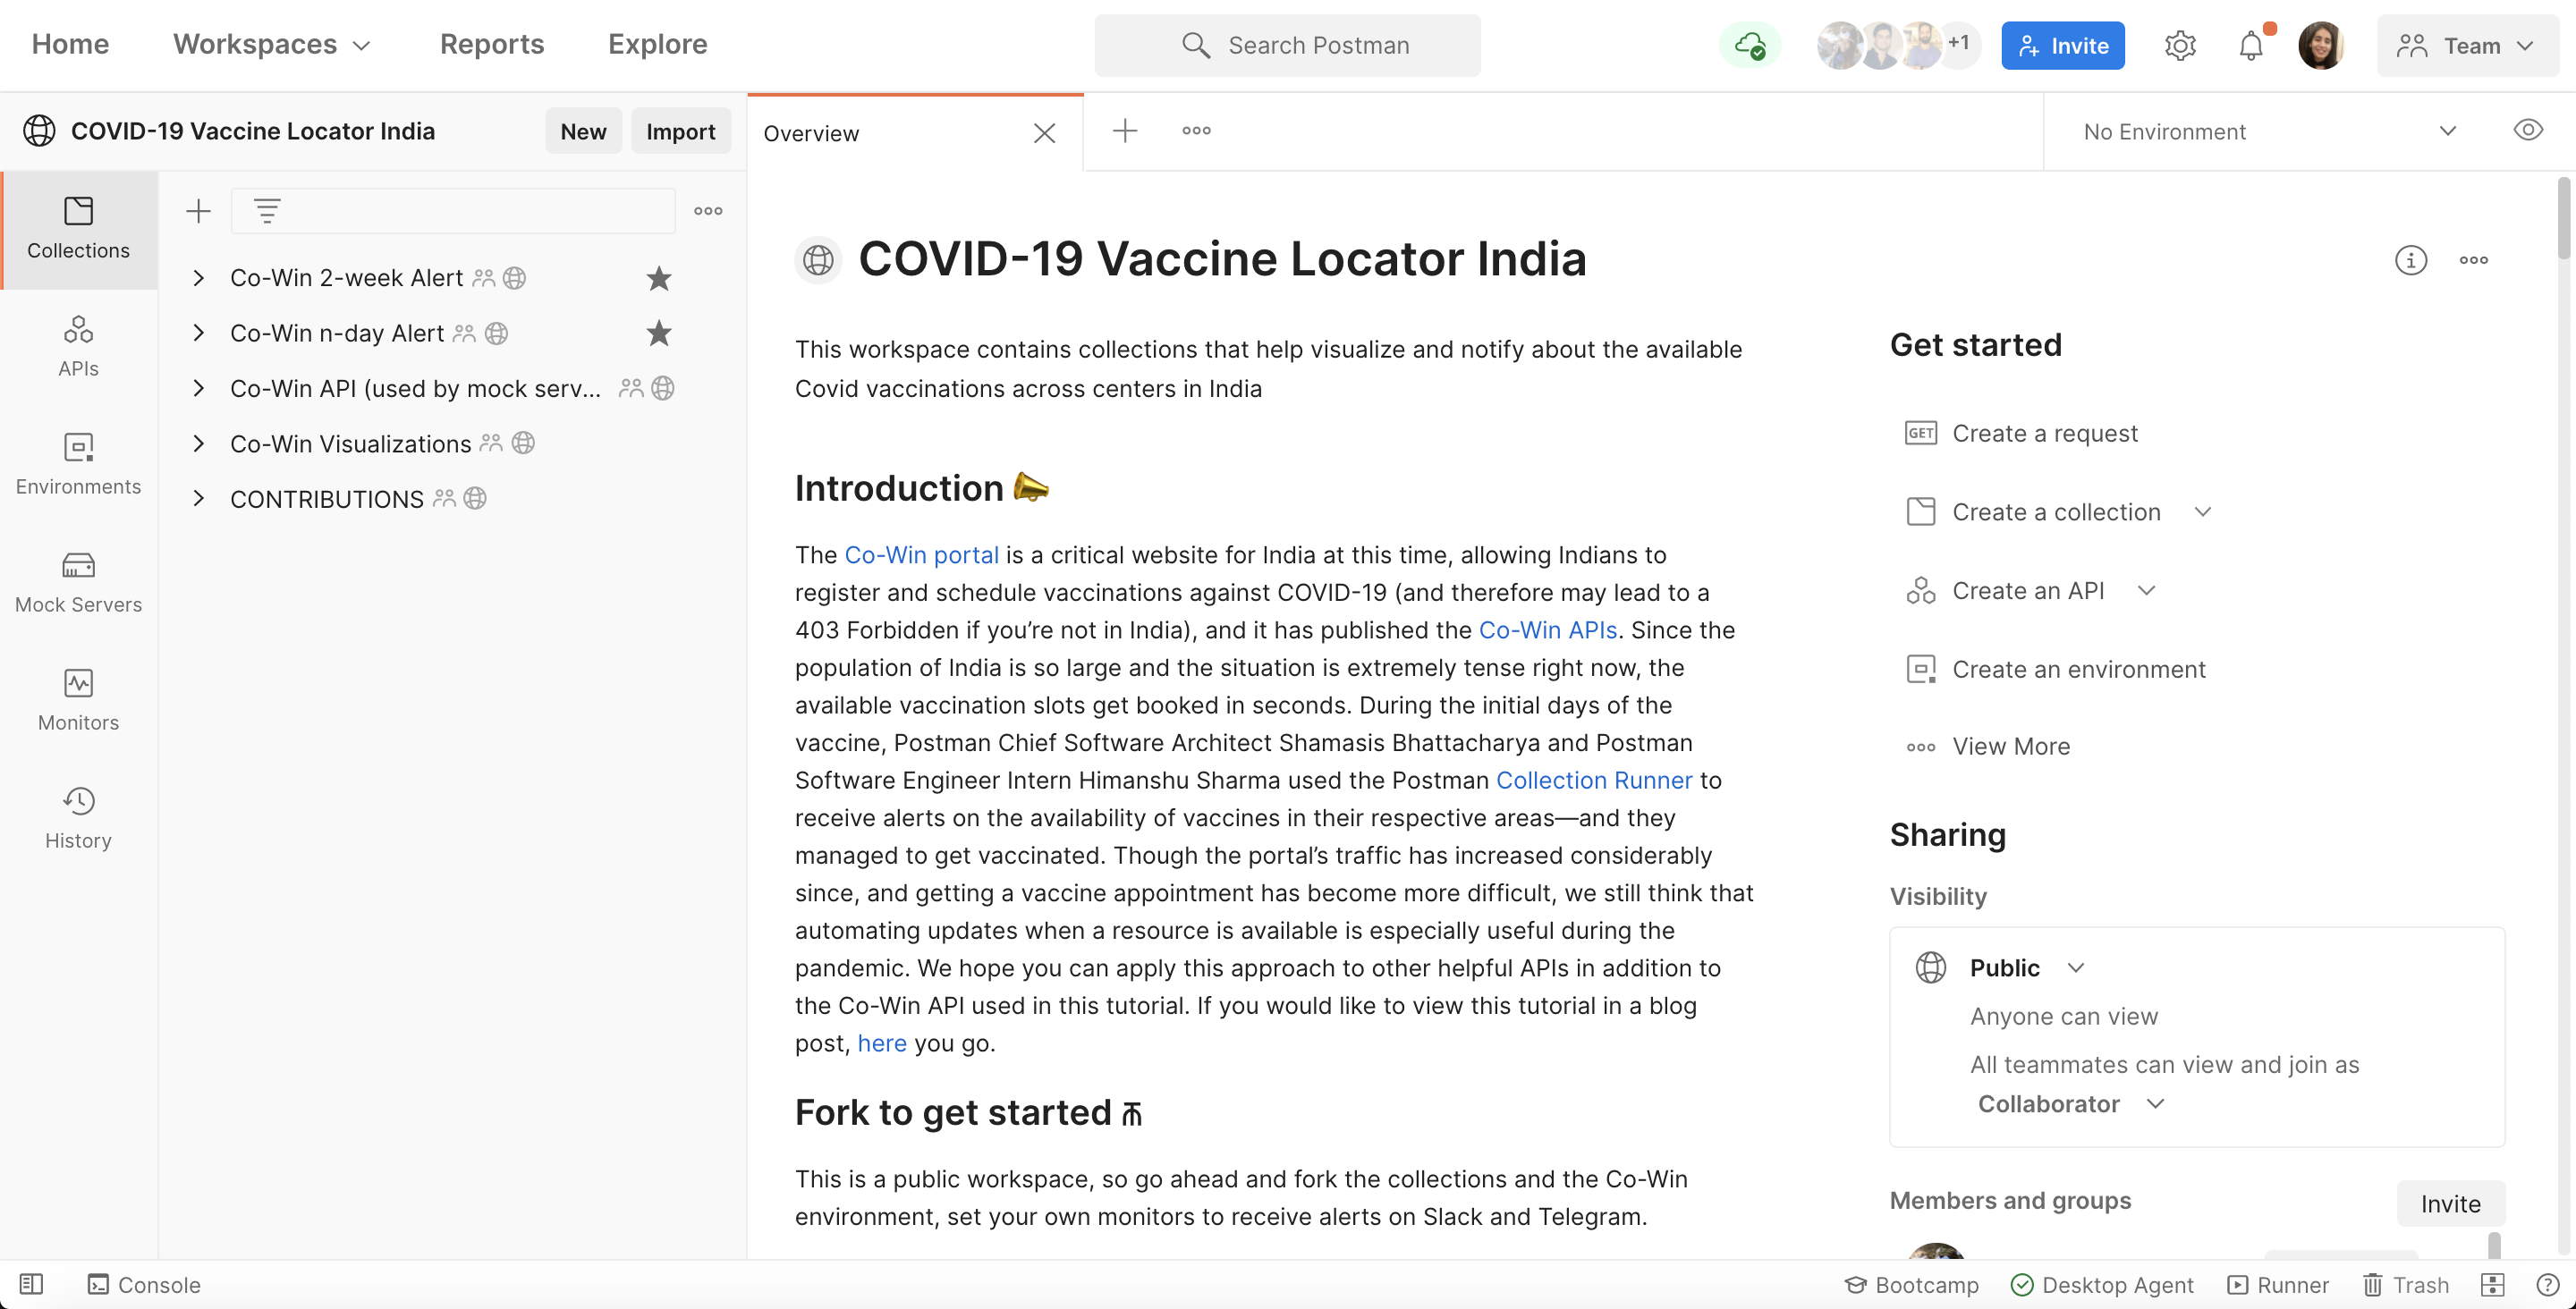 COVID-19 Vaccine Locator India public workspace Overview page